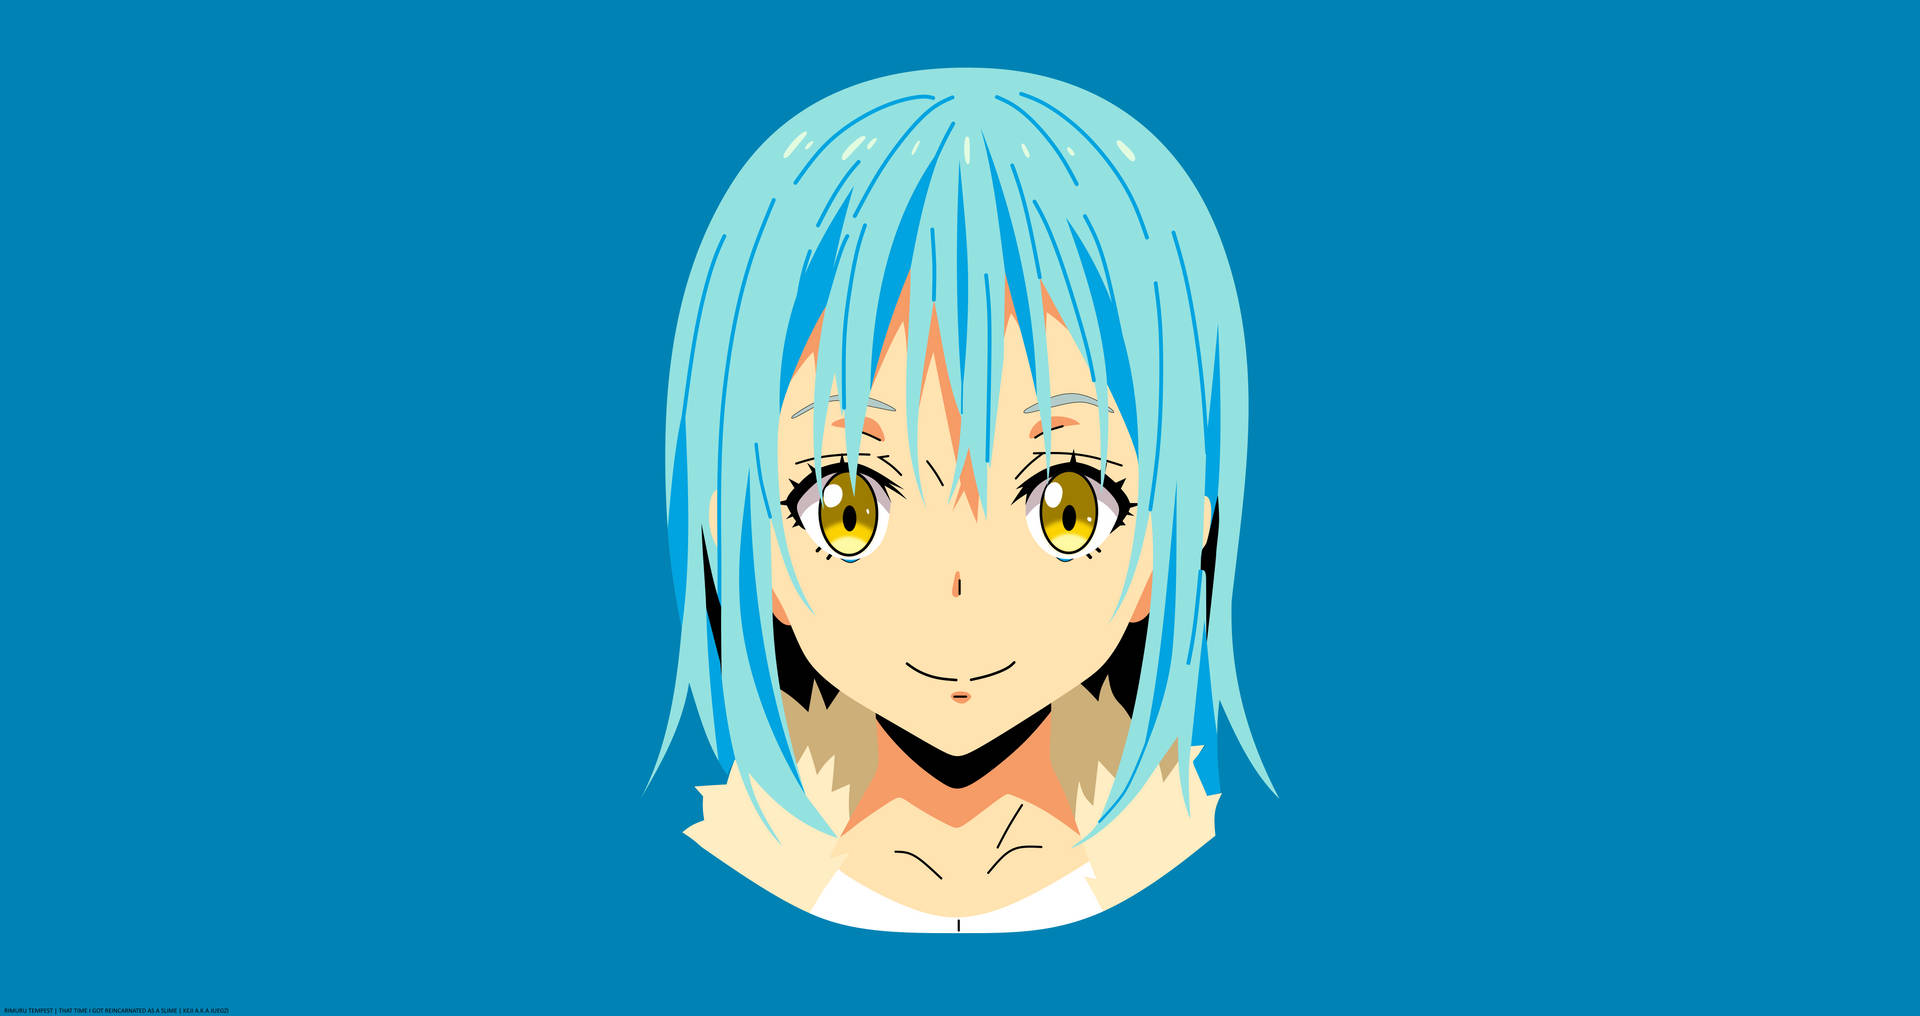 Invincible Rimuru Tempest - Anime Hero From That Time I Got Reincarnated As A Slime